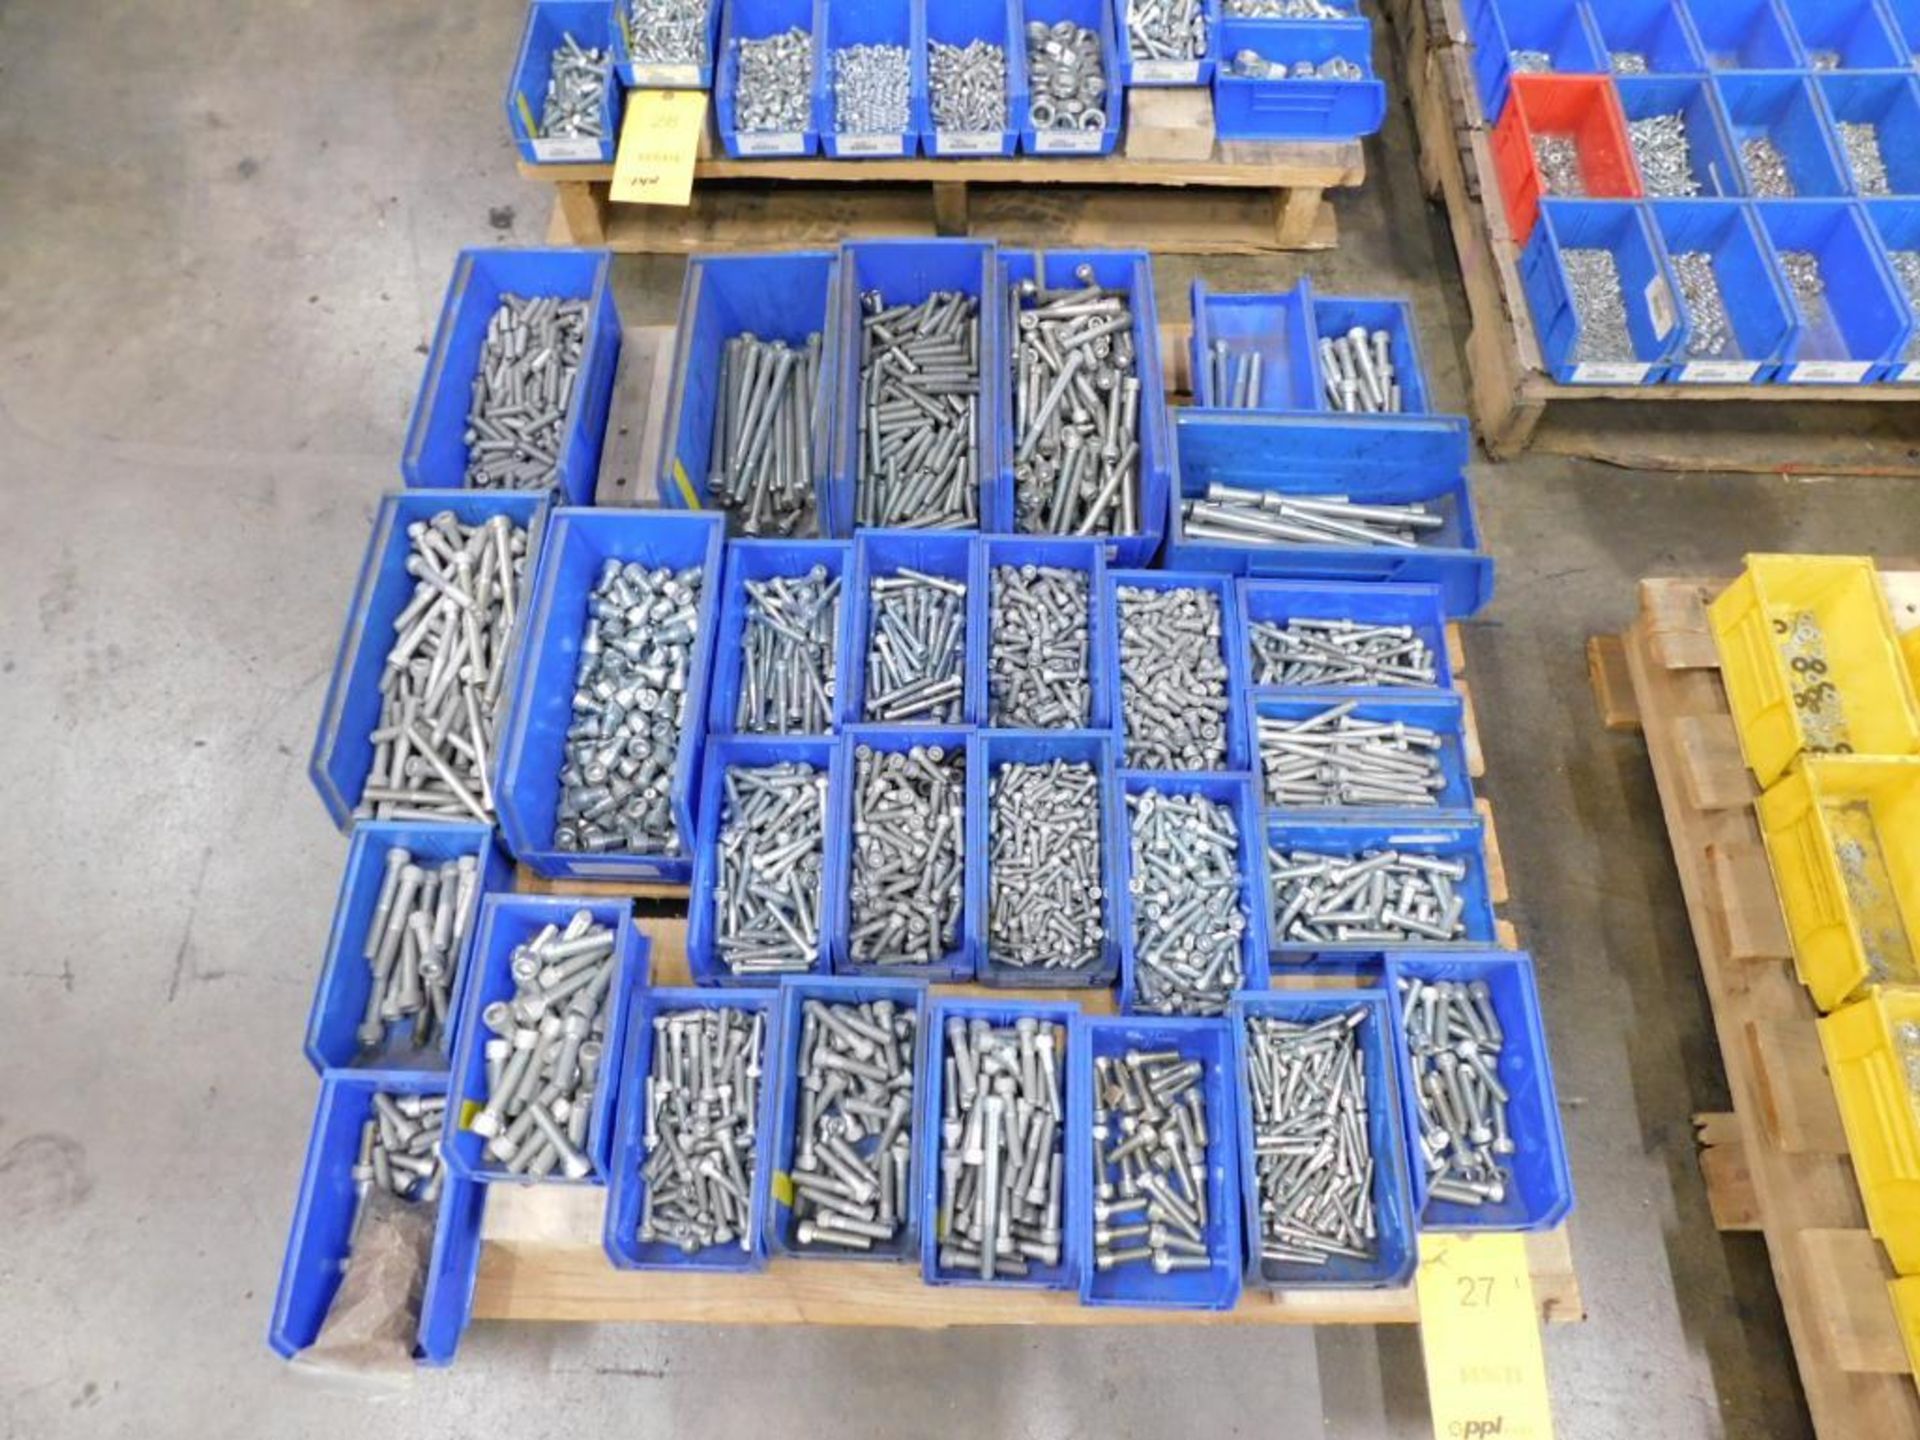 LOT: (1) Pallet of Assorted Hardware in Compartment Bins, Bolts